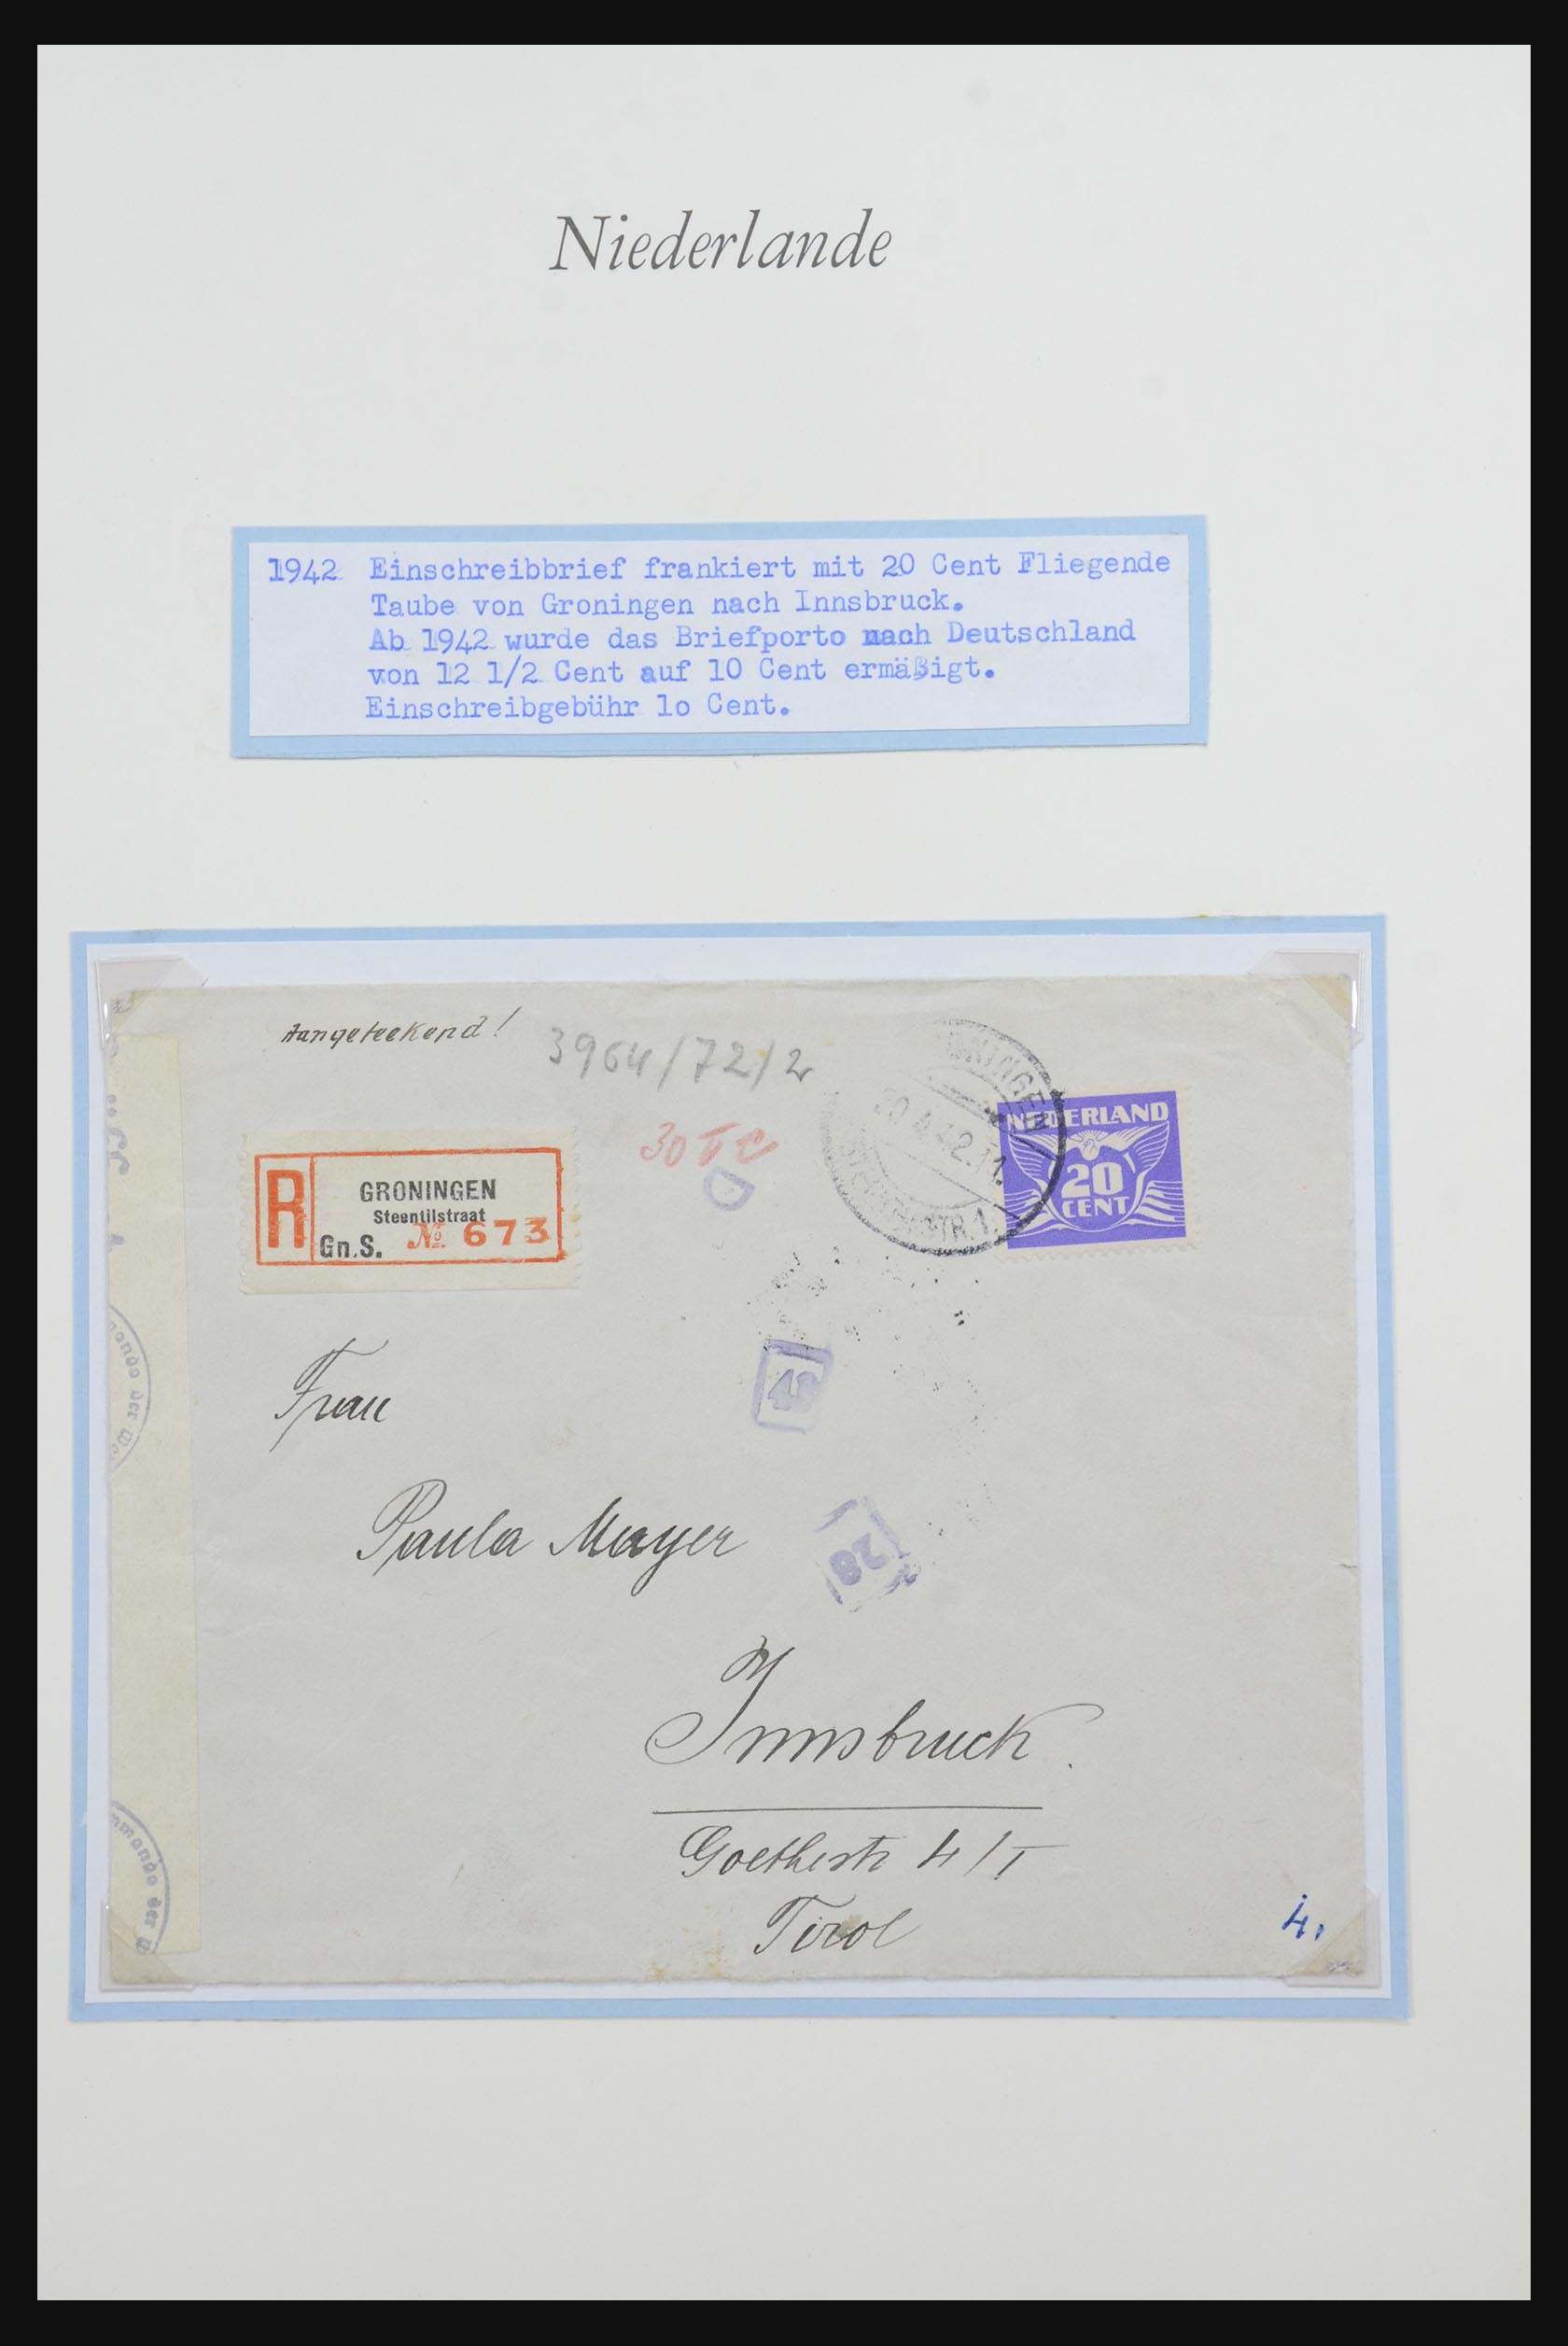 32159 009 - 32159 Netherlands covers 1925-1946.